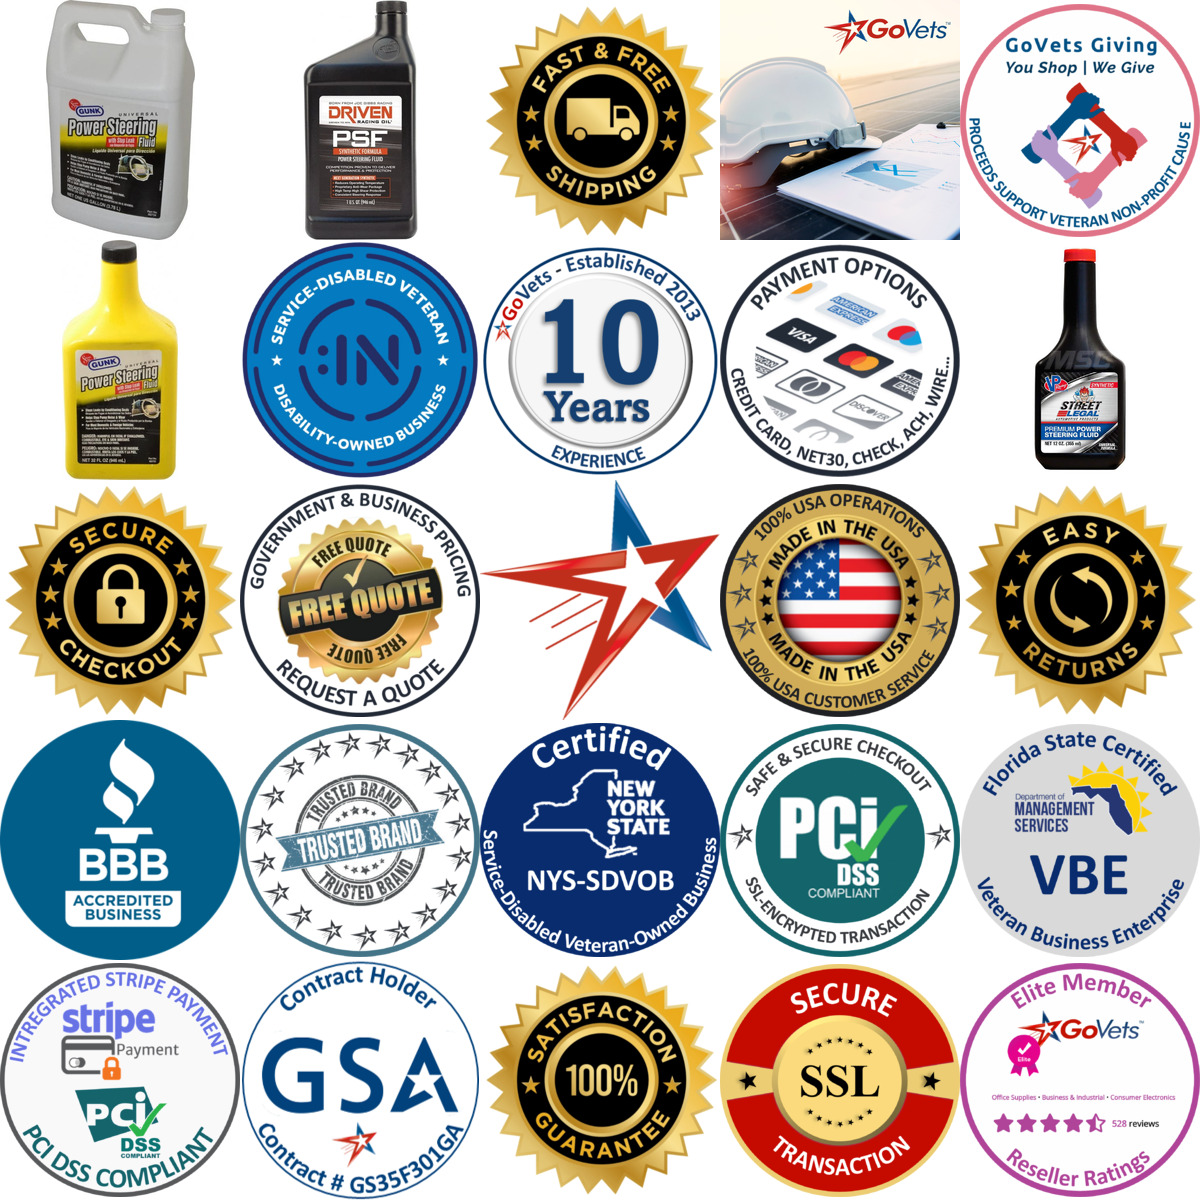 A selection of Power Steering Fluid products on GoVets